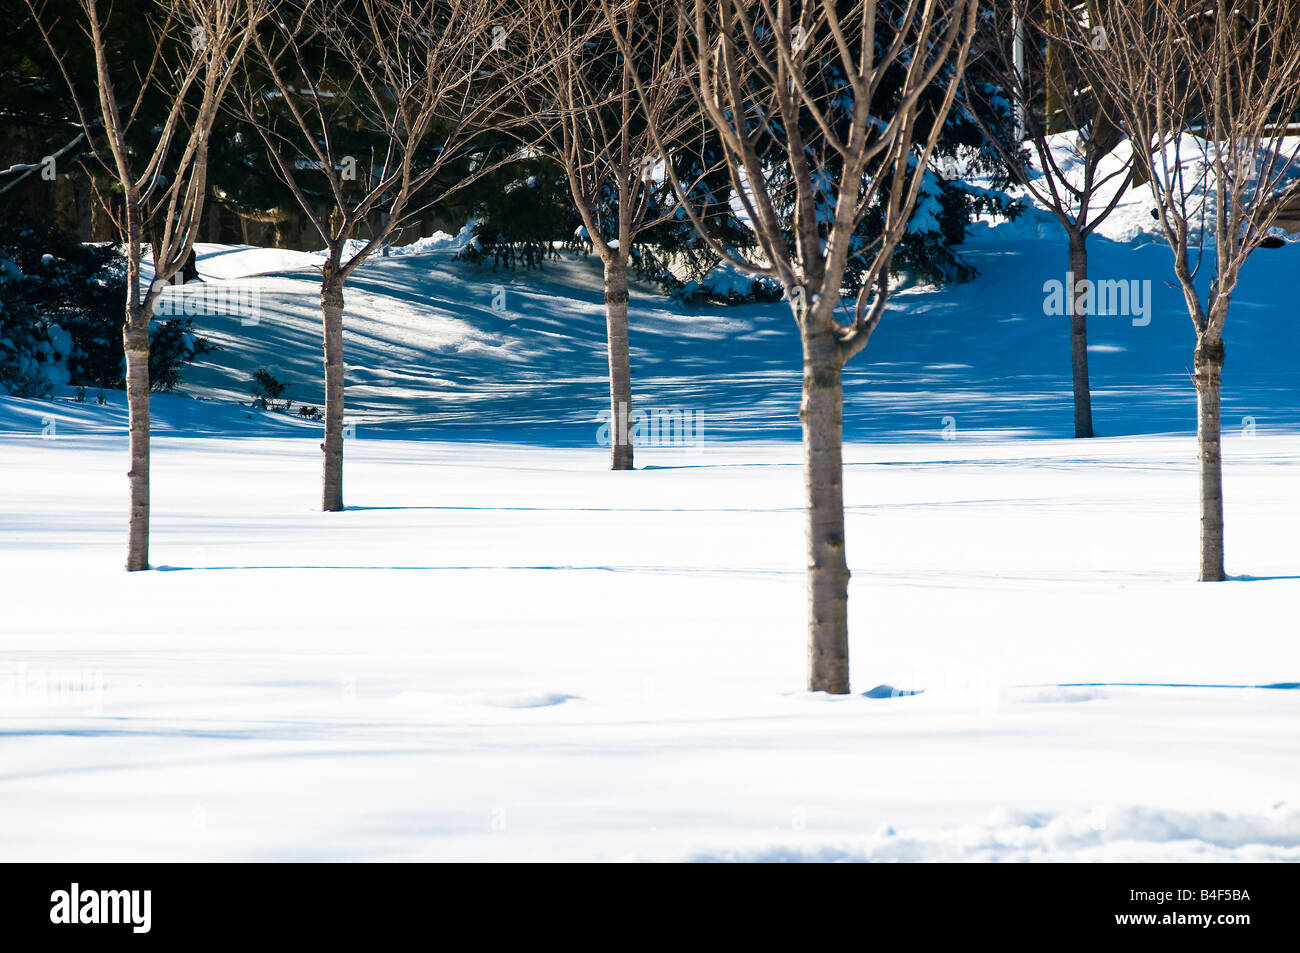 A canadian winter scene at Gairloch Gardens in Oakville, Ontario,Canada Stock Photo